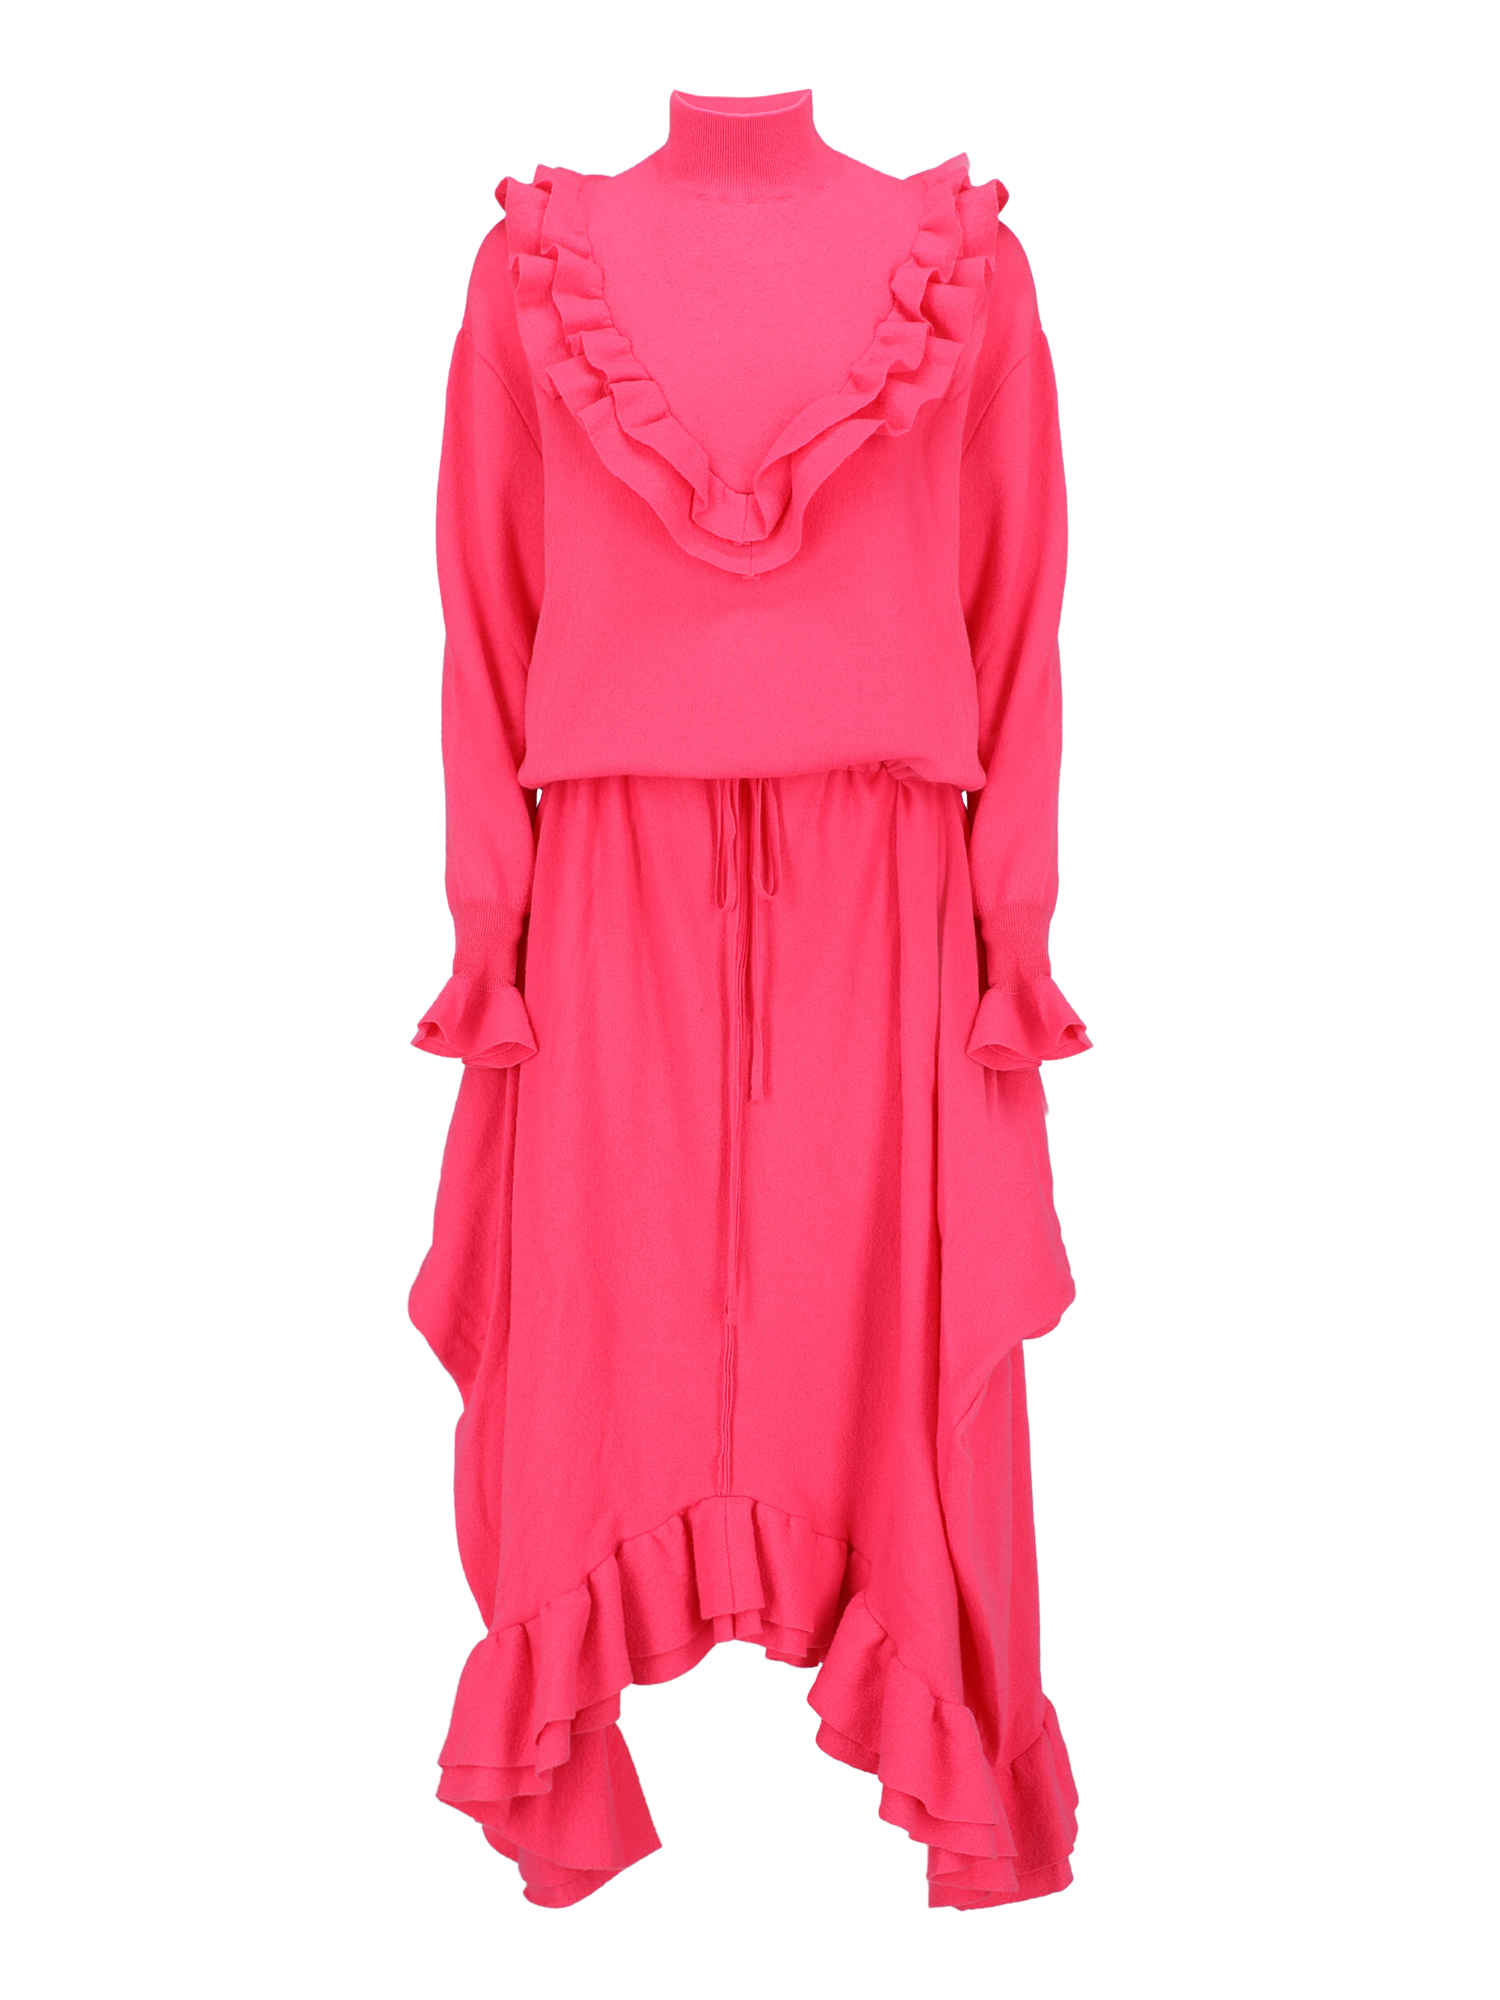 Condition: New With Tag, Solid Color Wool, Color: Pink - XS - IT 38 -